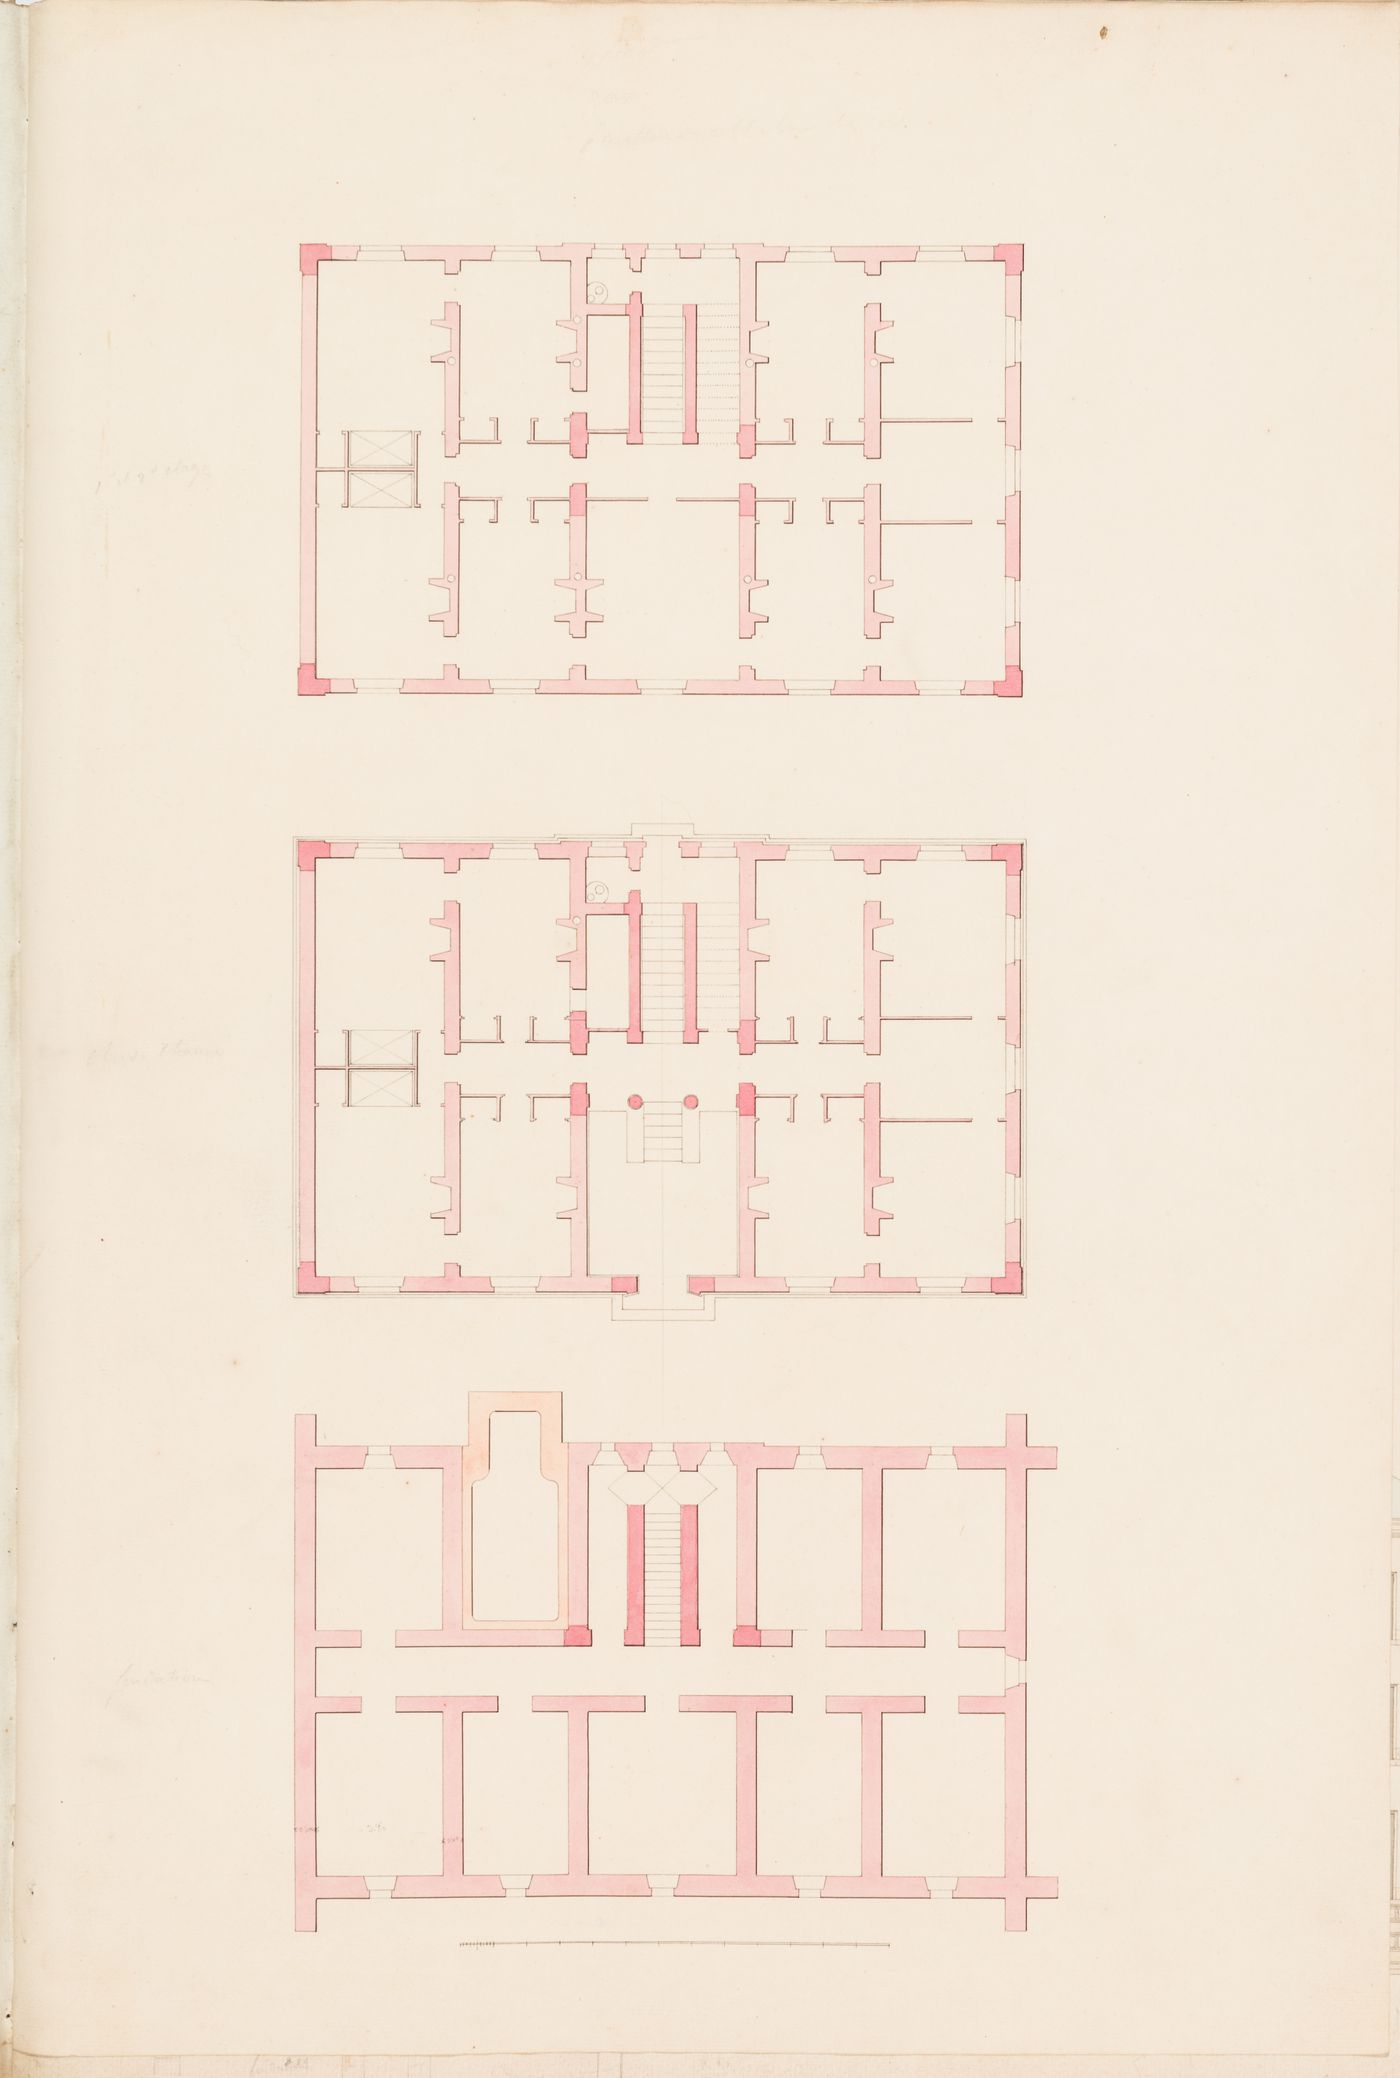 Project for the caserne de la Gendarmerie royale, rue Mouffetard: Plans for the foundation, ground, first and second floors for the officers' pavilion